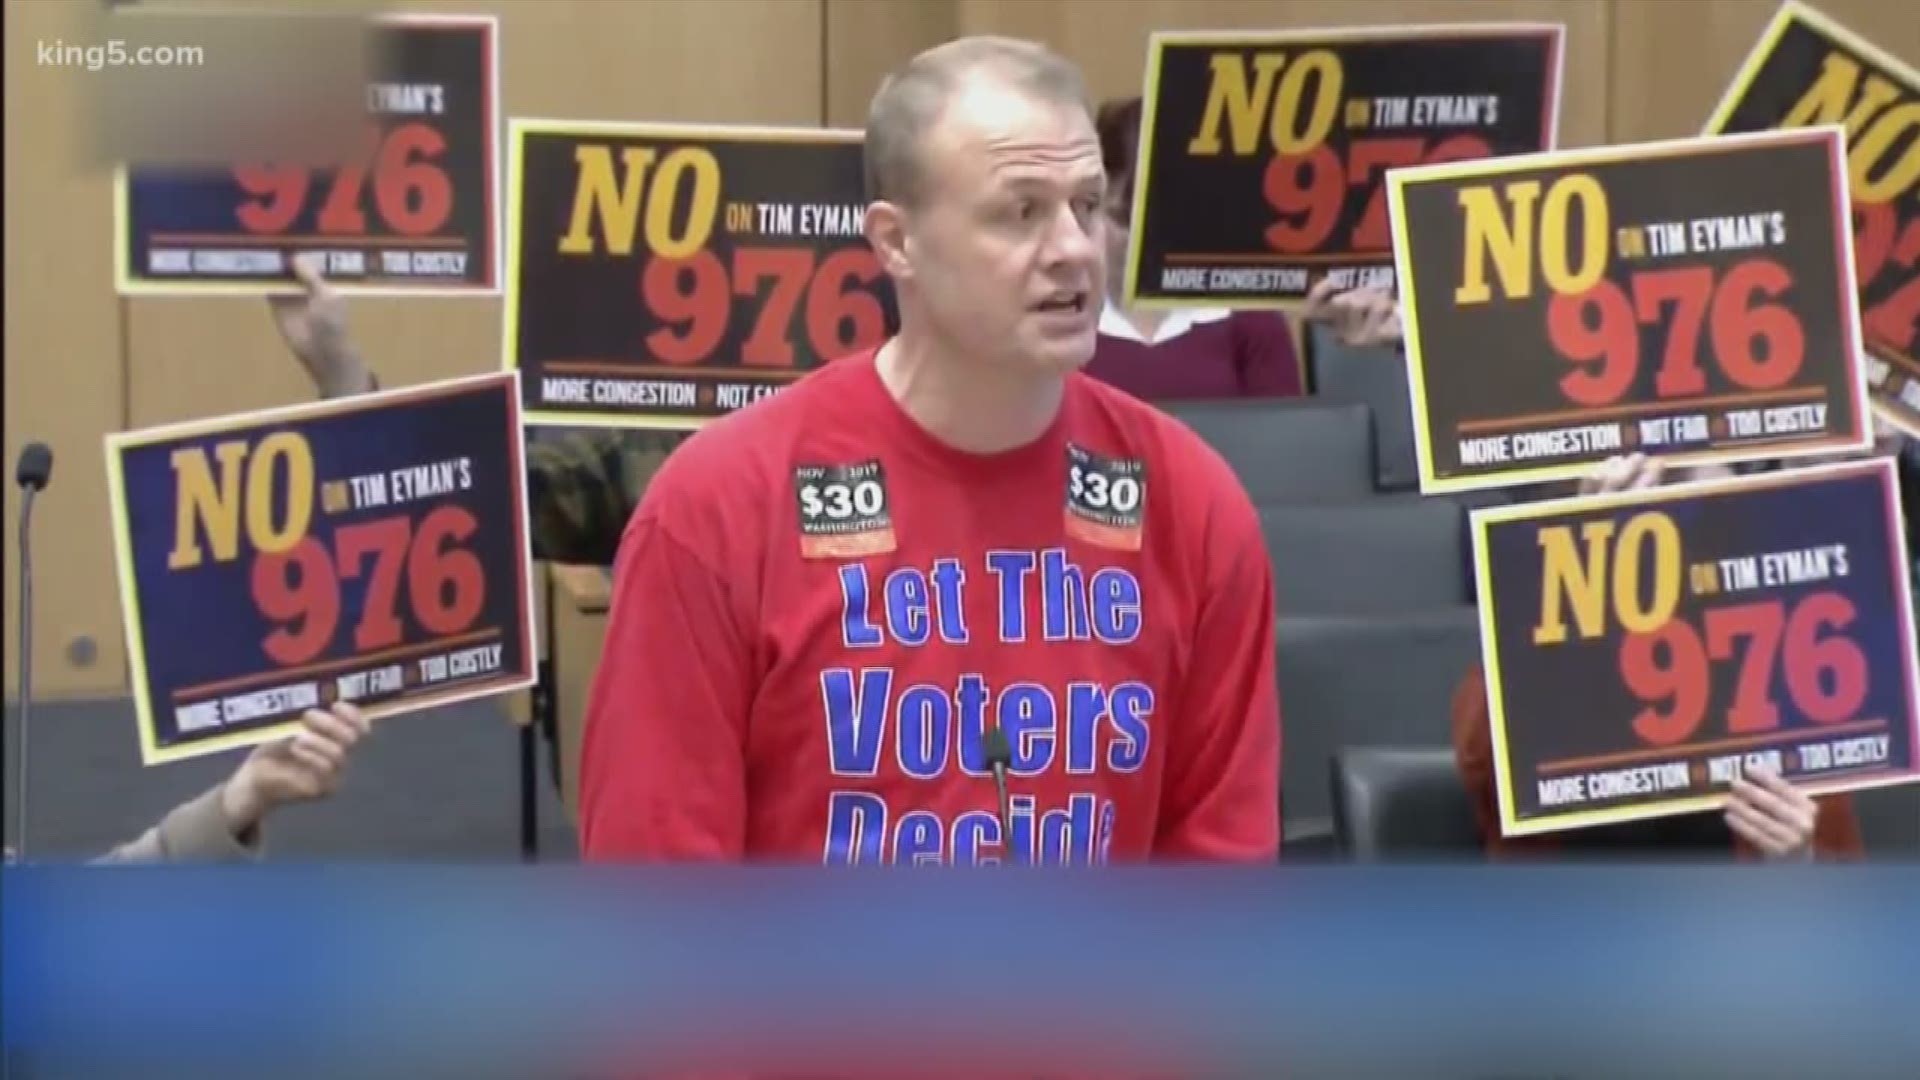 Tim Eyman was sitting in the council chambers as city councilors all voted "no" on I-976.